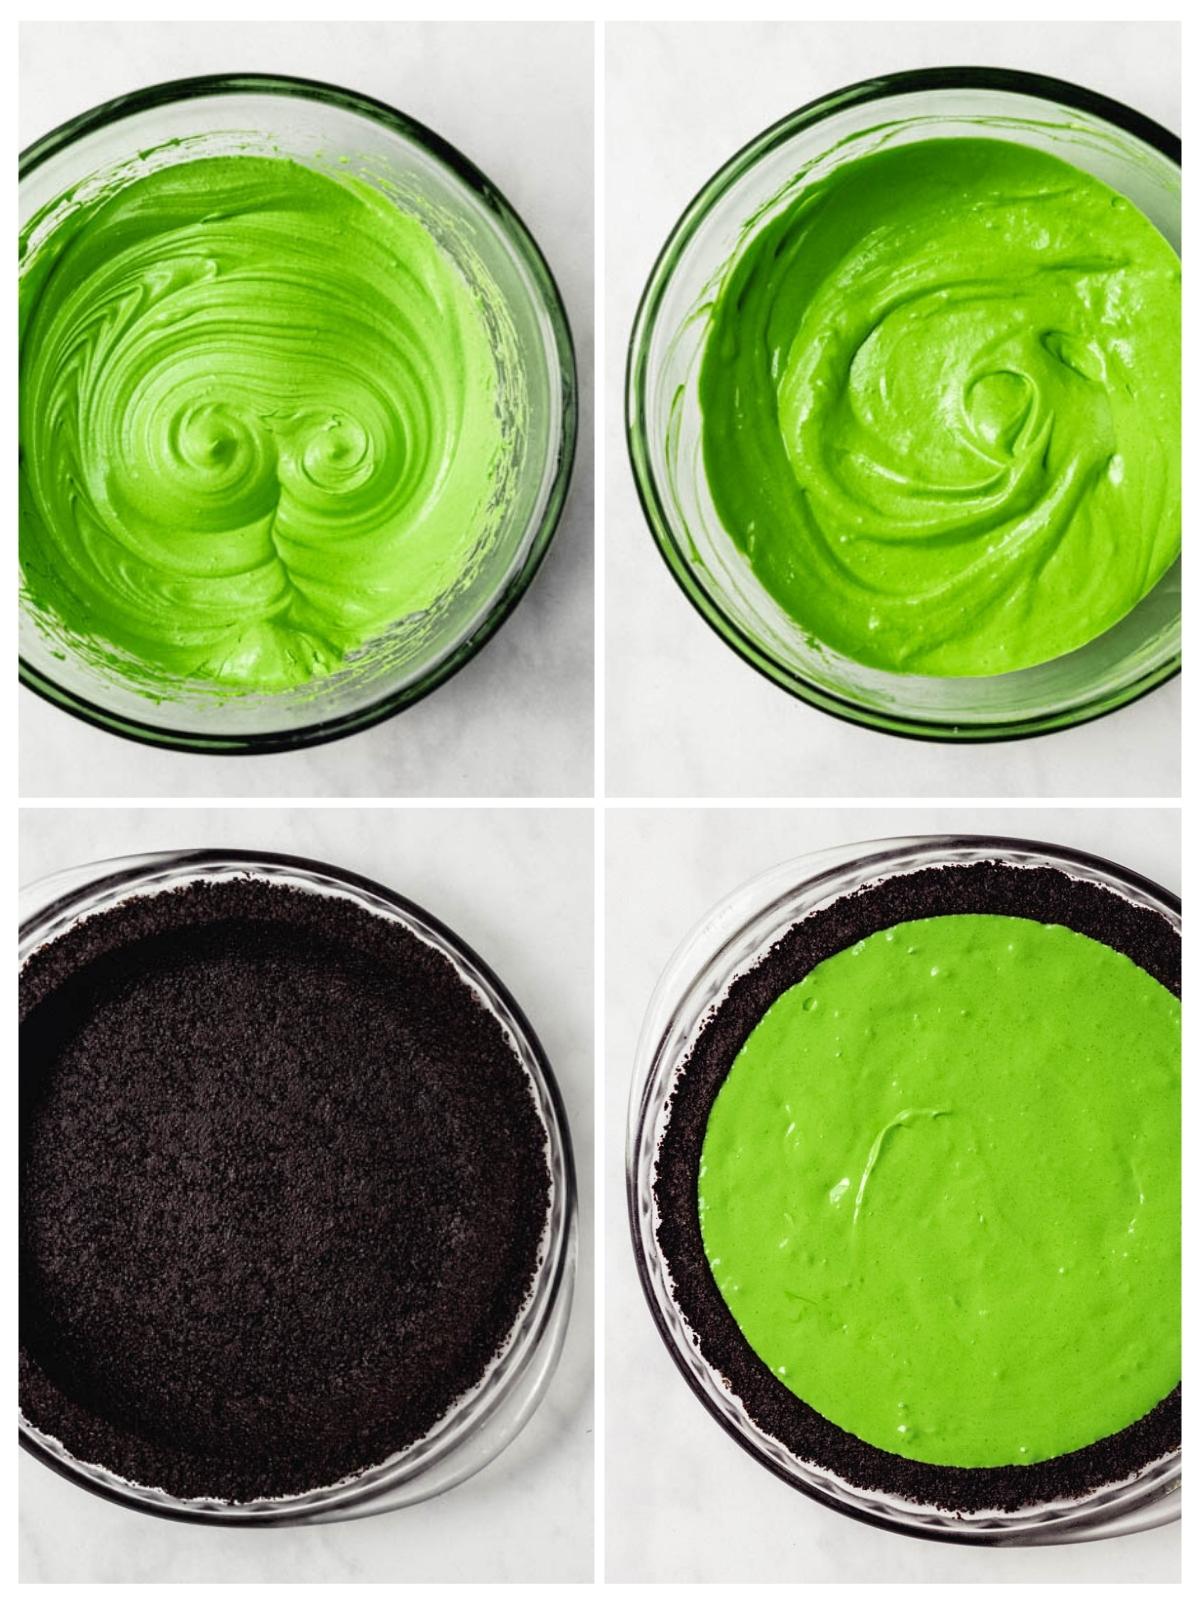 filling oreo crust with green cheesecake filling